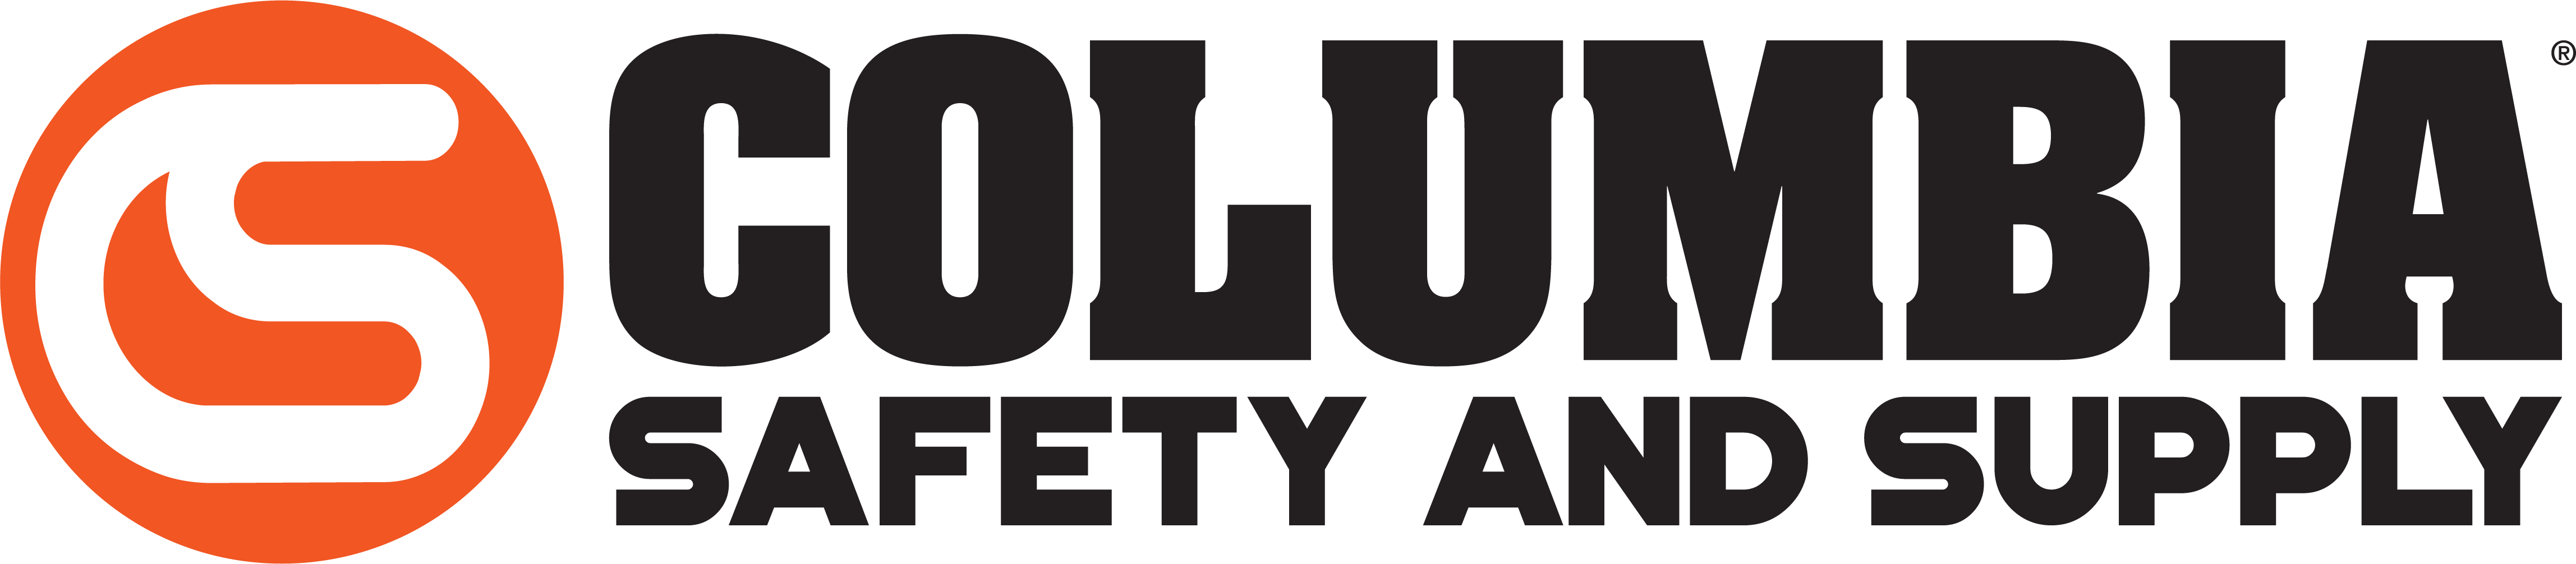 About Us - Columbia Safety and Supply